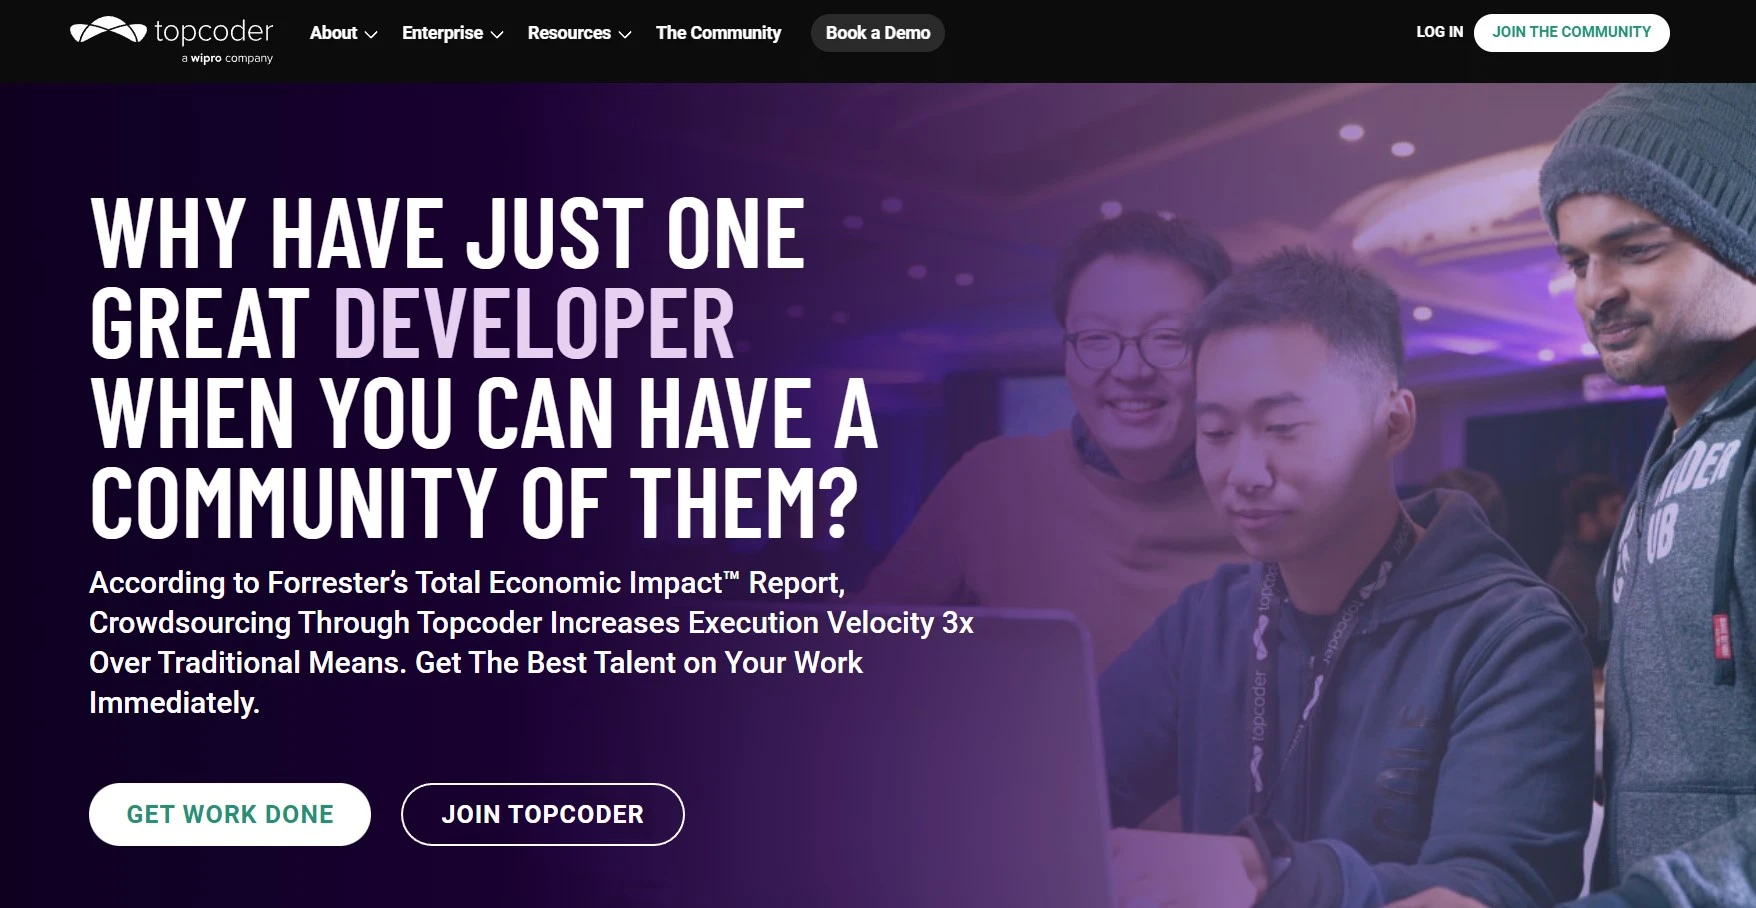 Topcoder website to learn coding